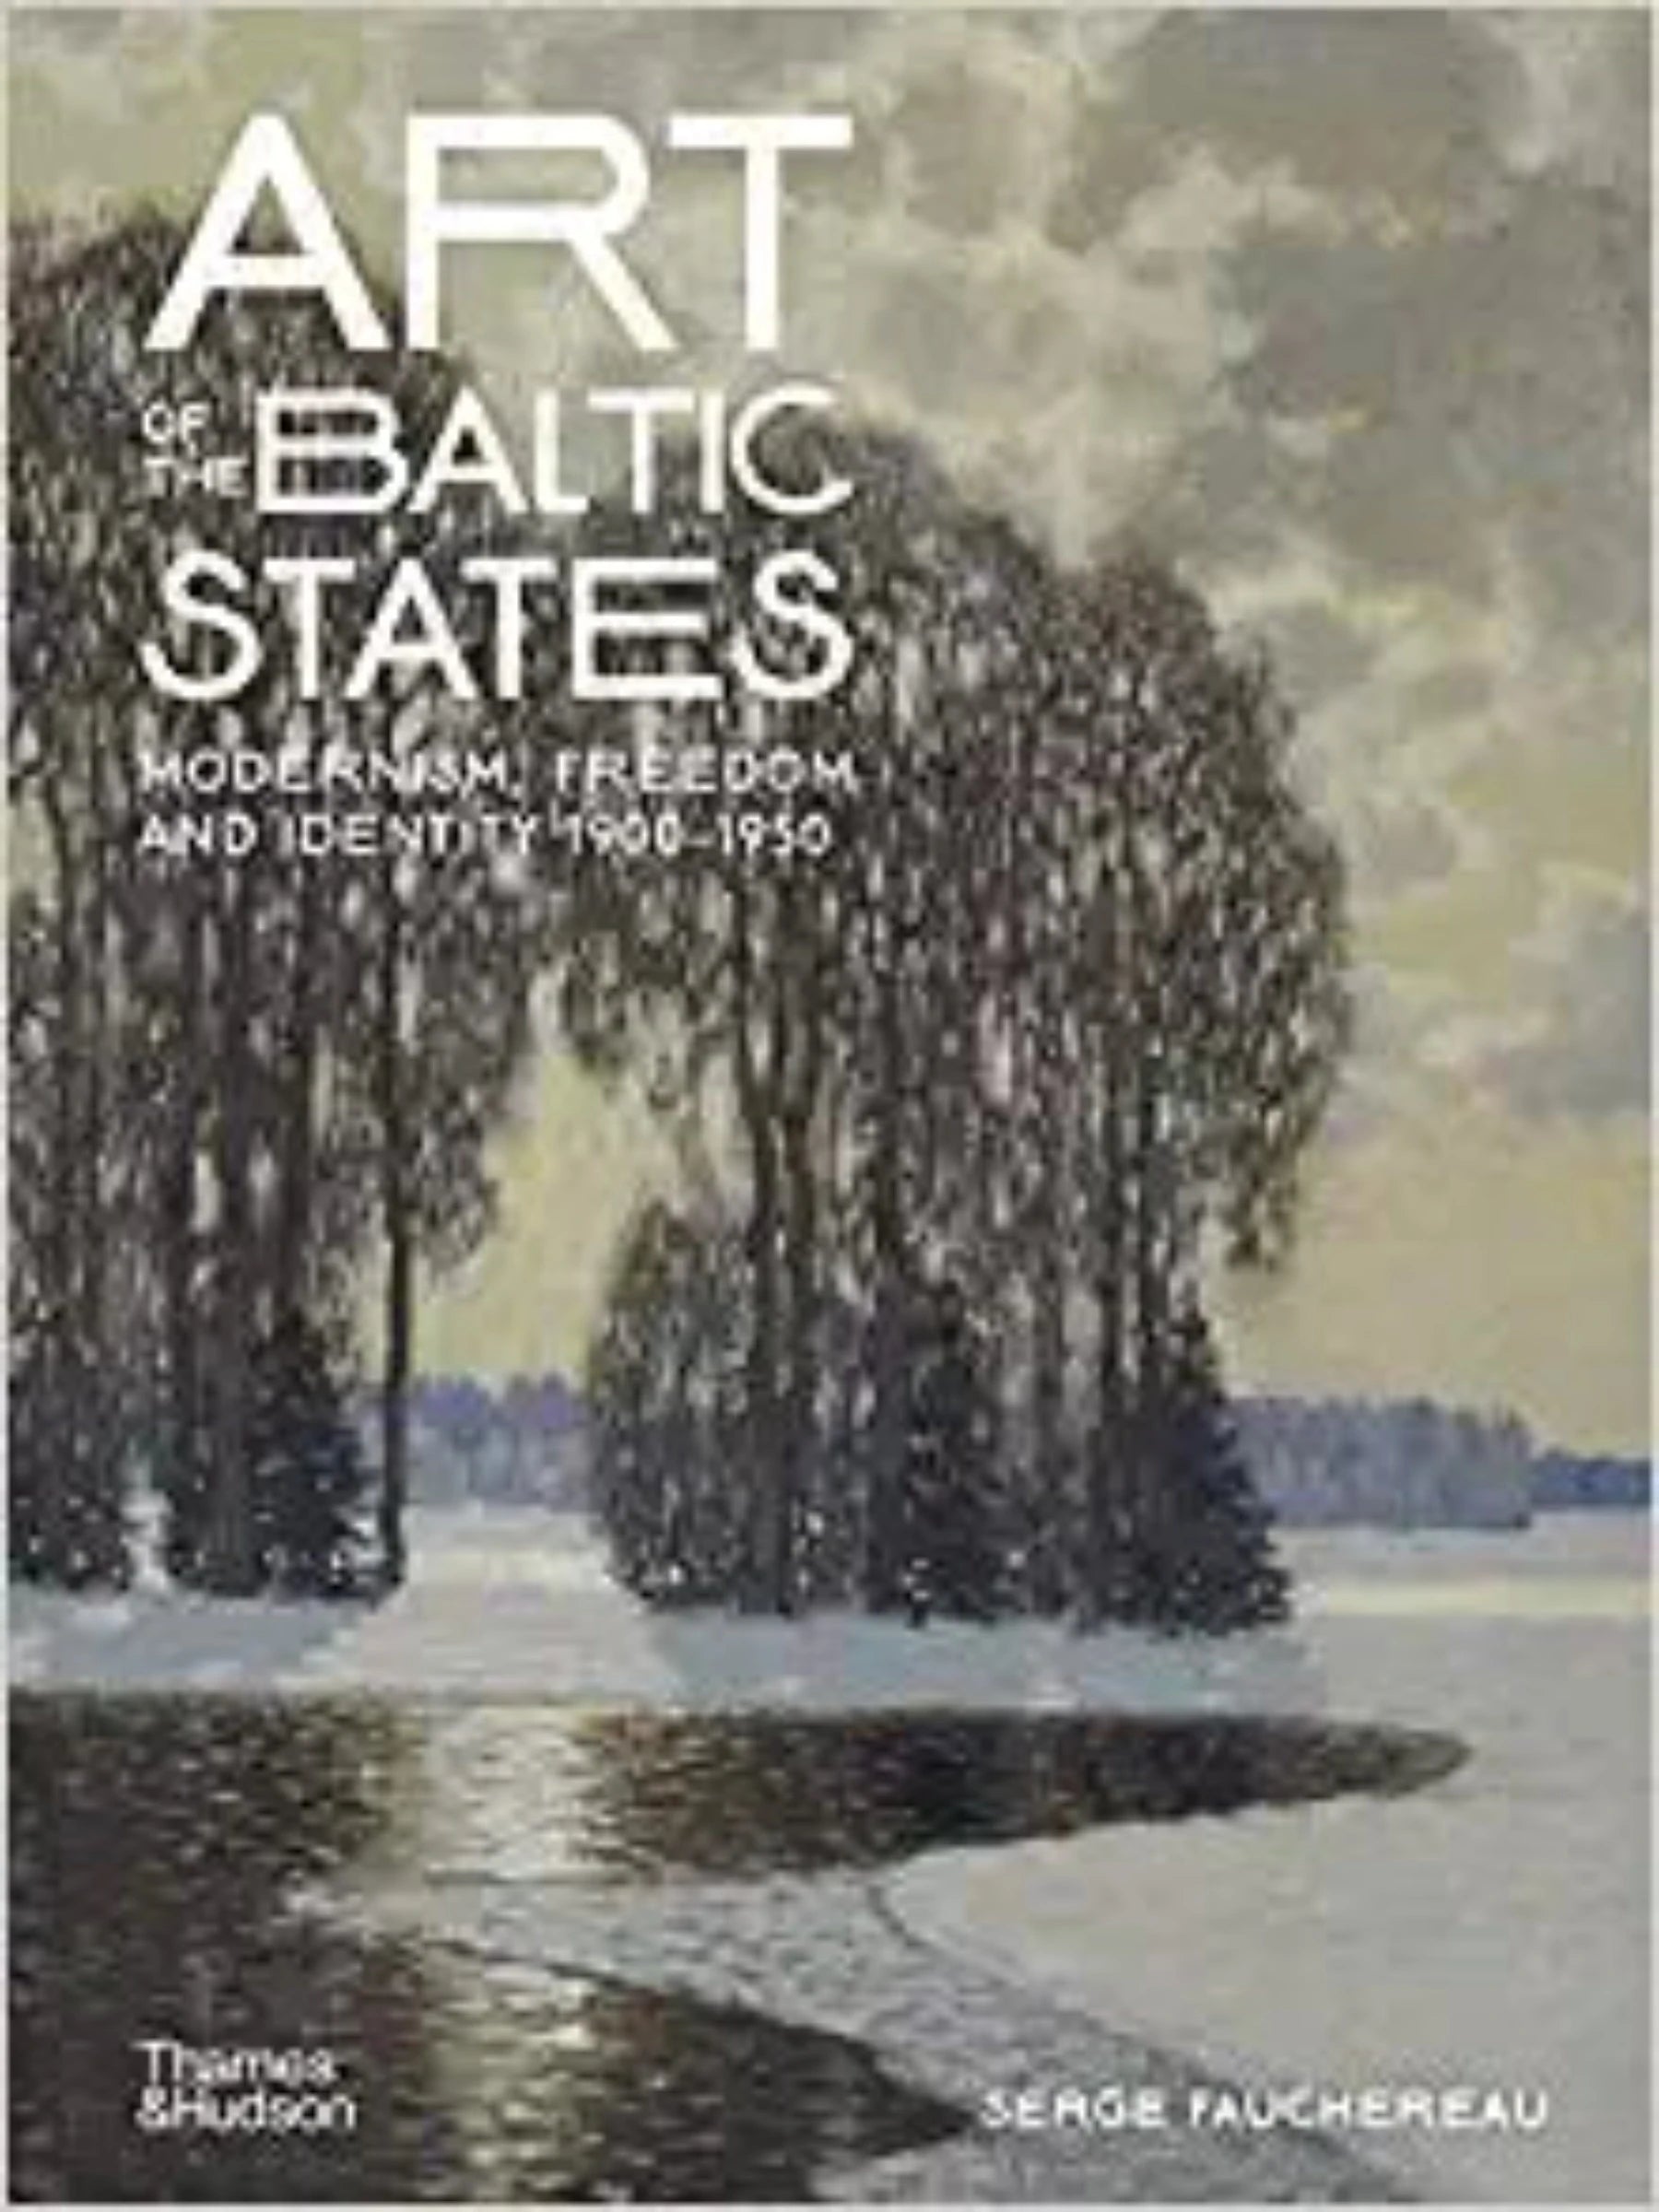 Art of the Baltic States